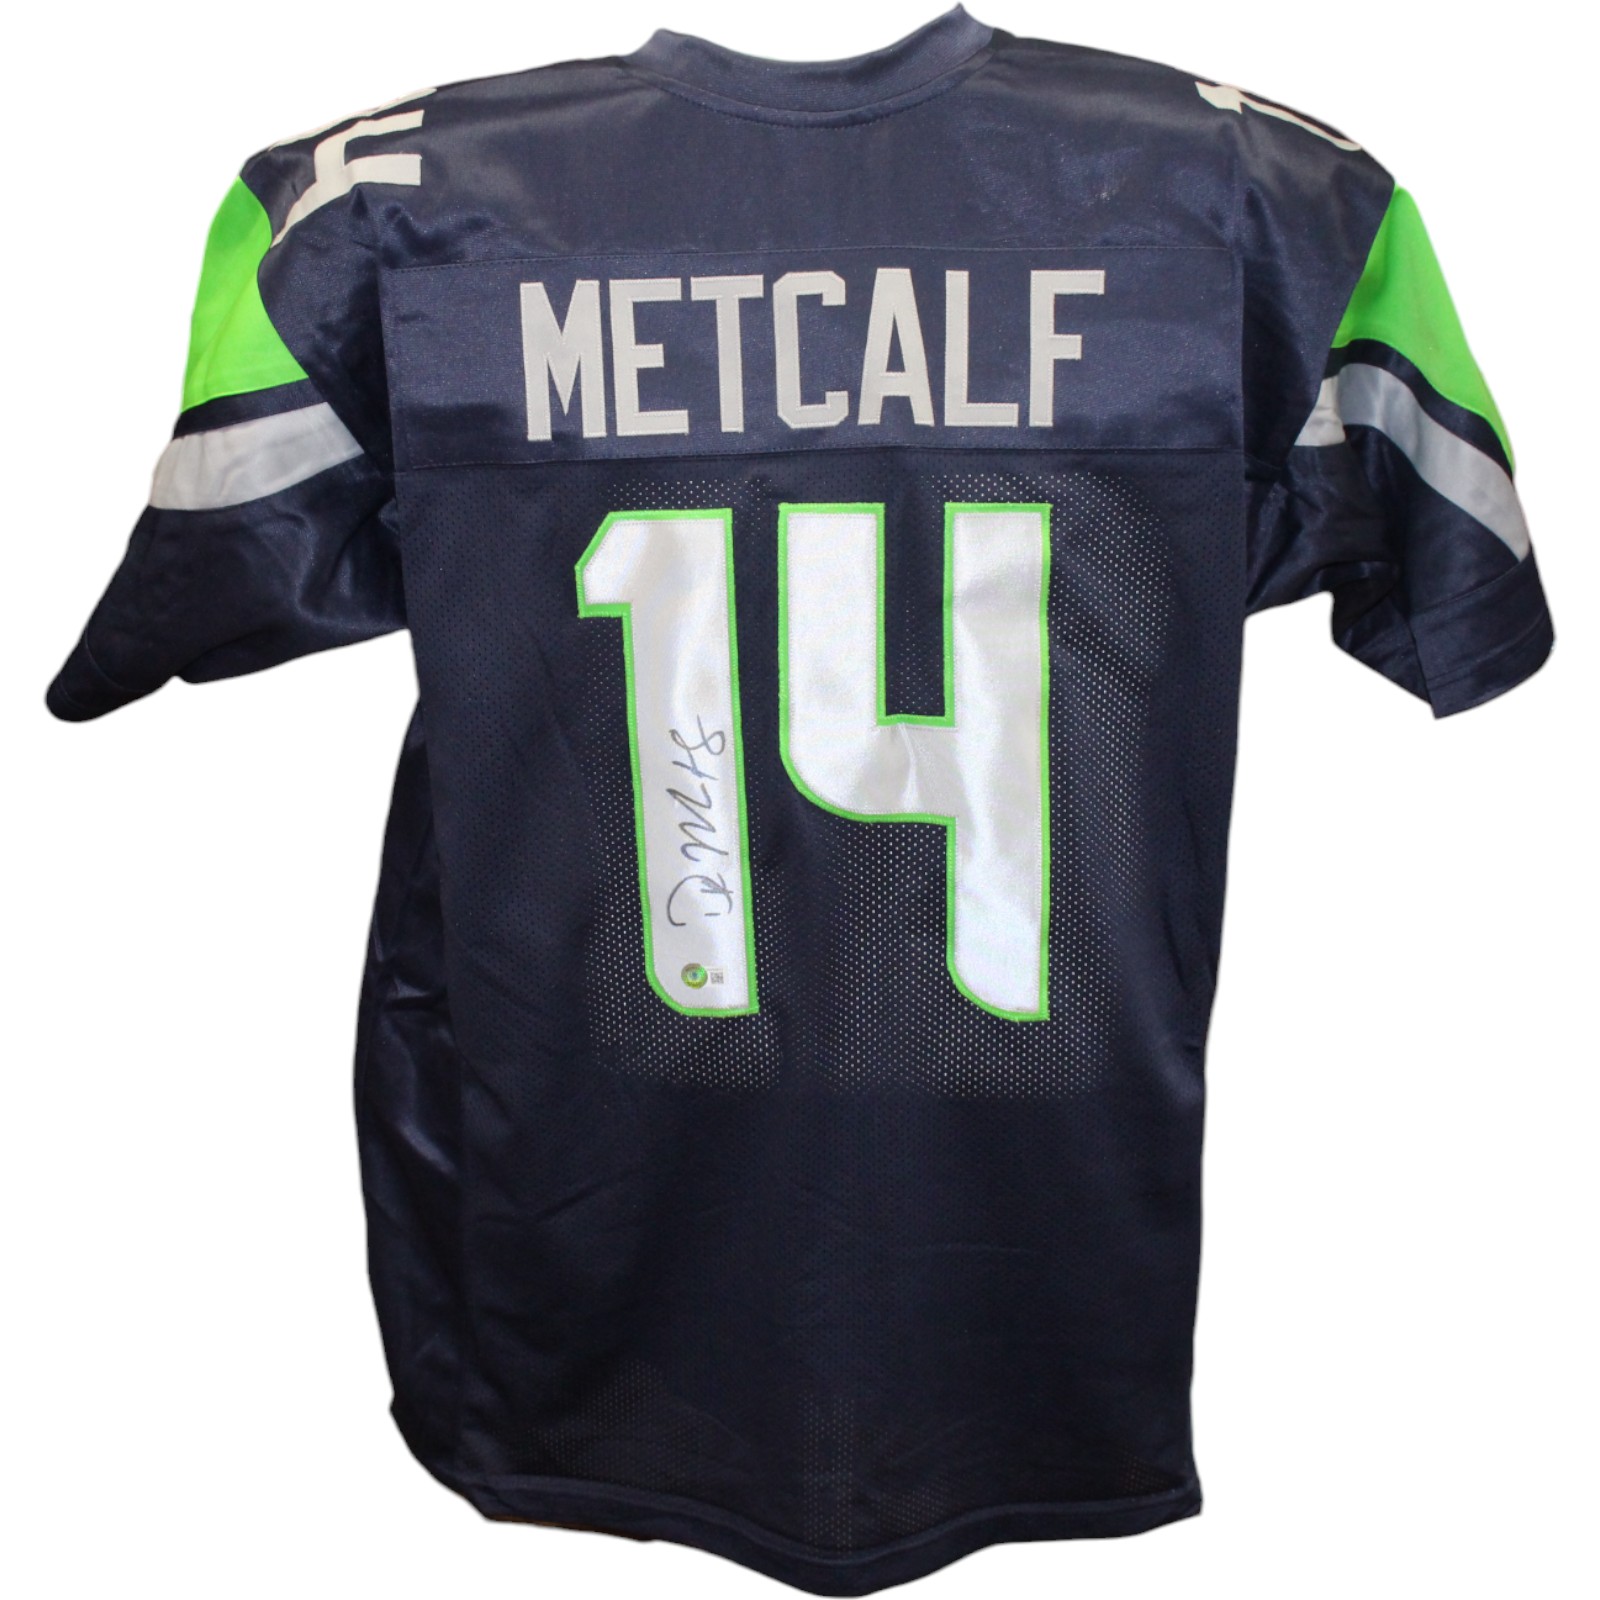 DK Metcalf Autographed/Signed Pro Style Blue Jersey Beckett